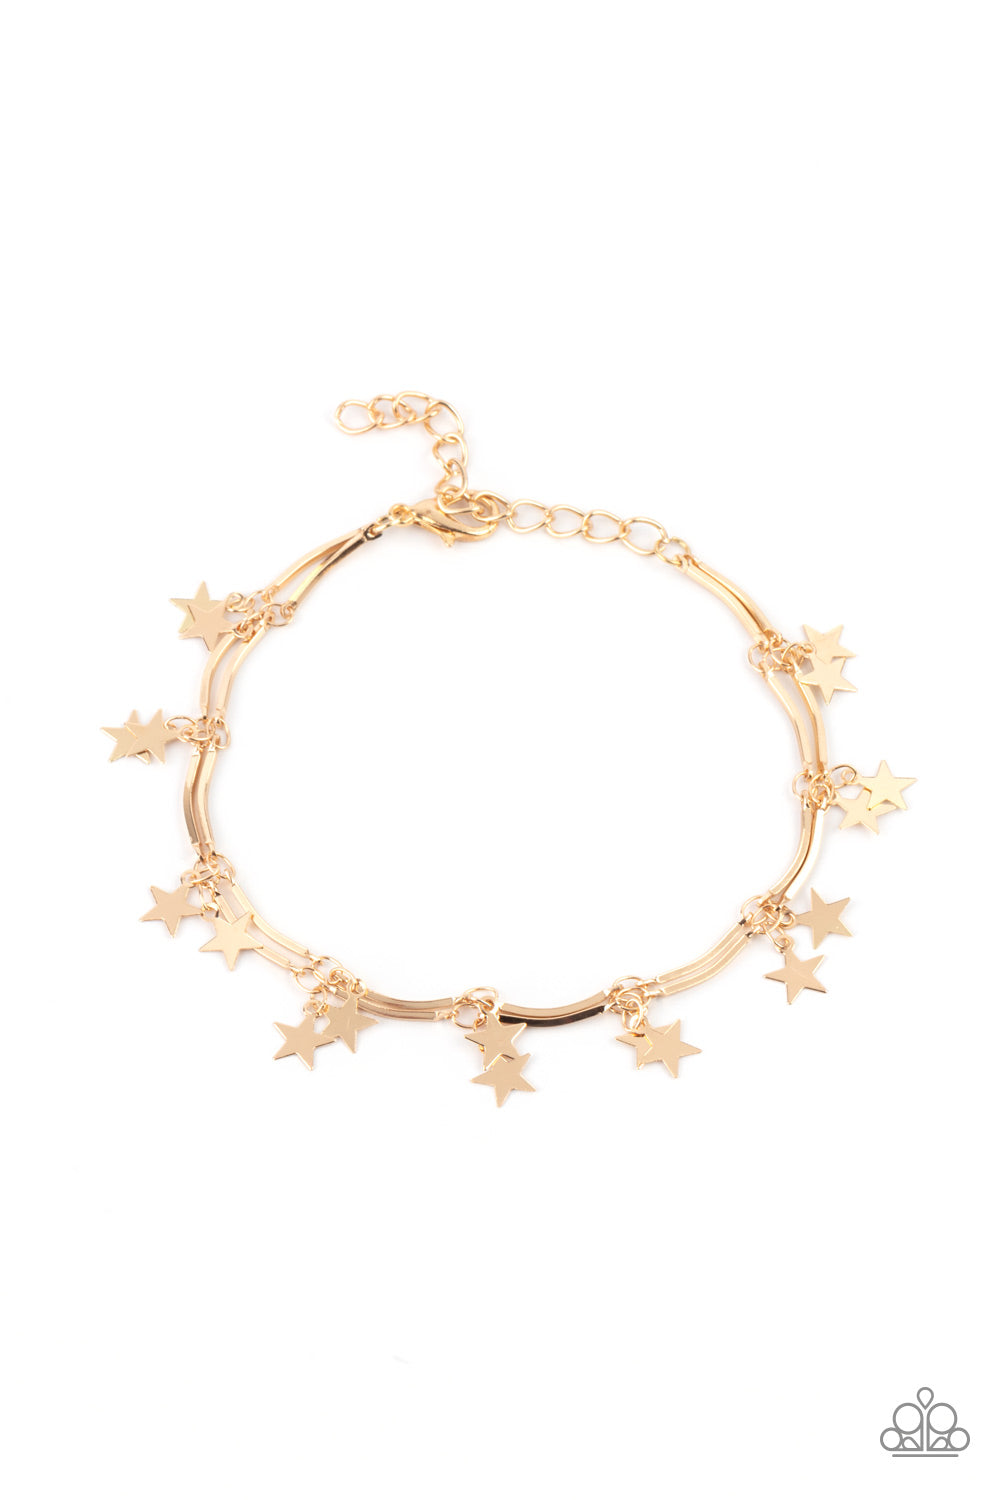 gold, fourth of july, holiday, bracelet, claw clasp, star, gold jewelry, affordable jewelry